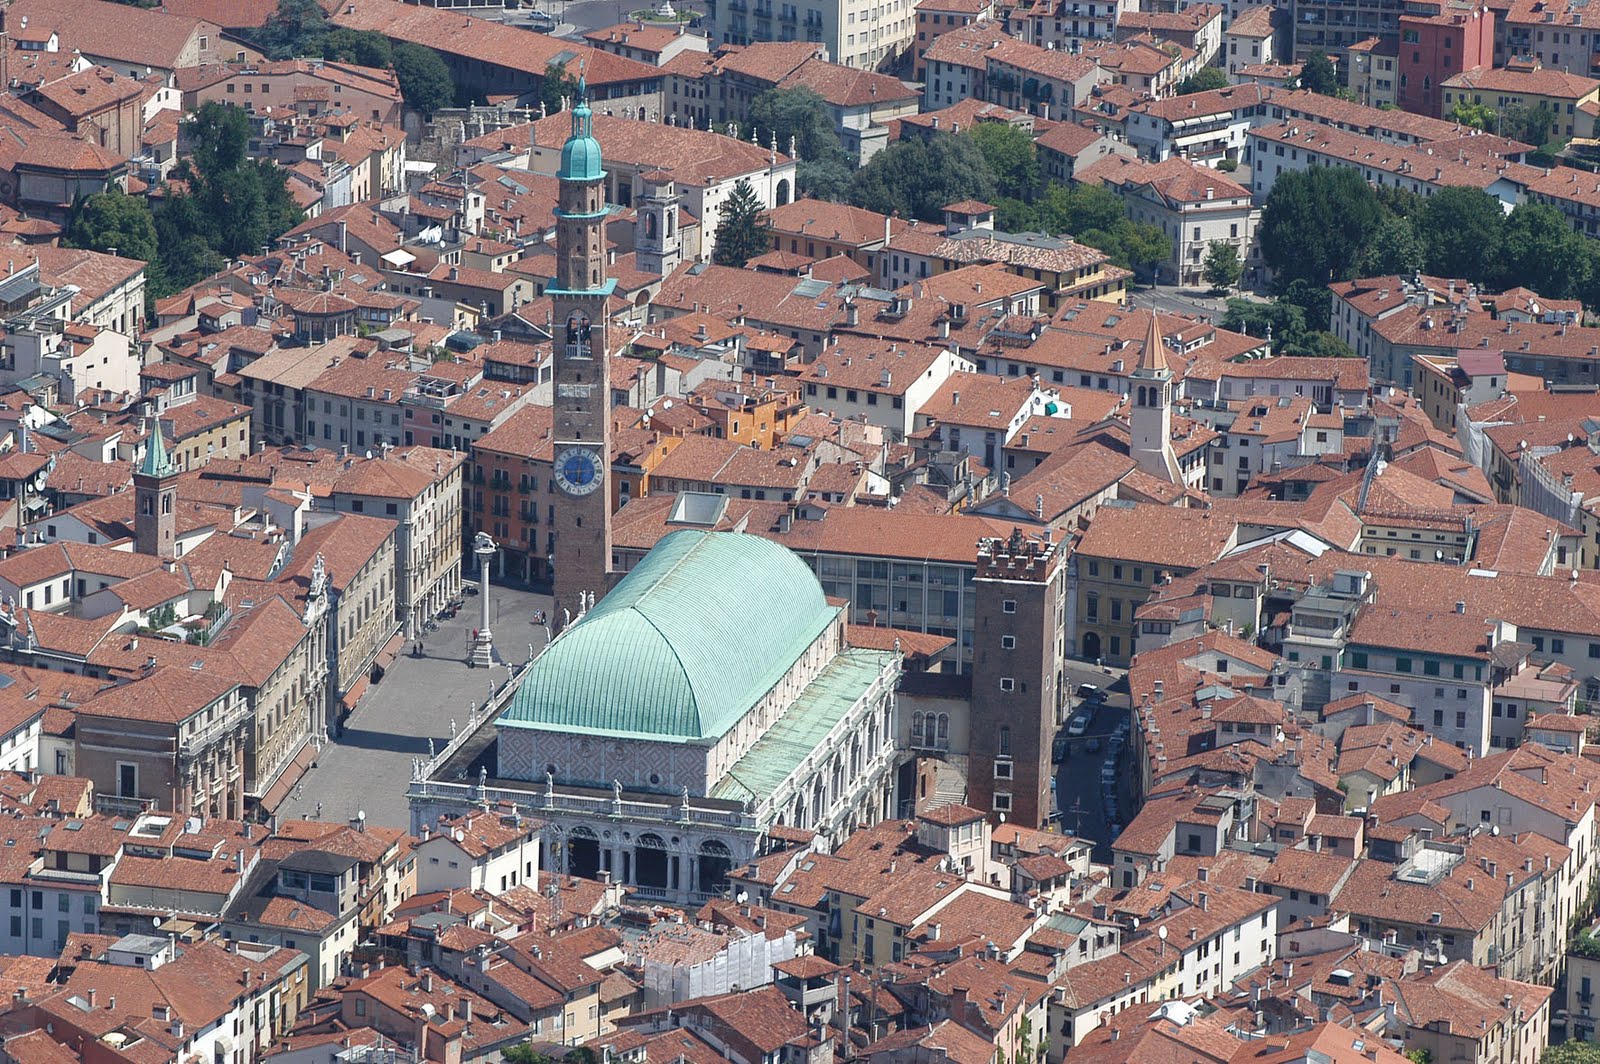 The rooftops of Vicenza